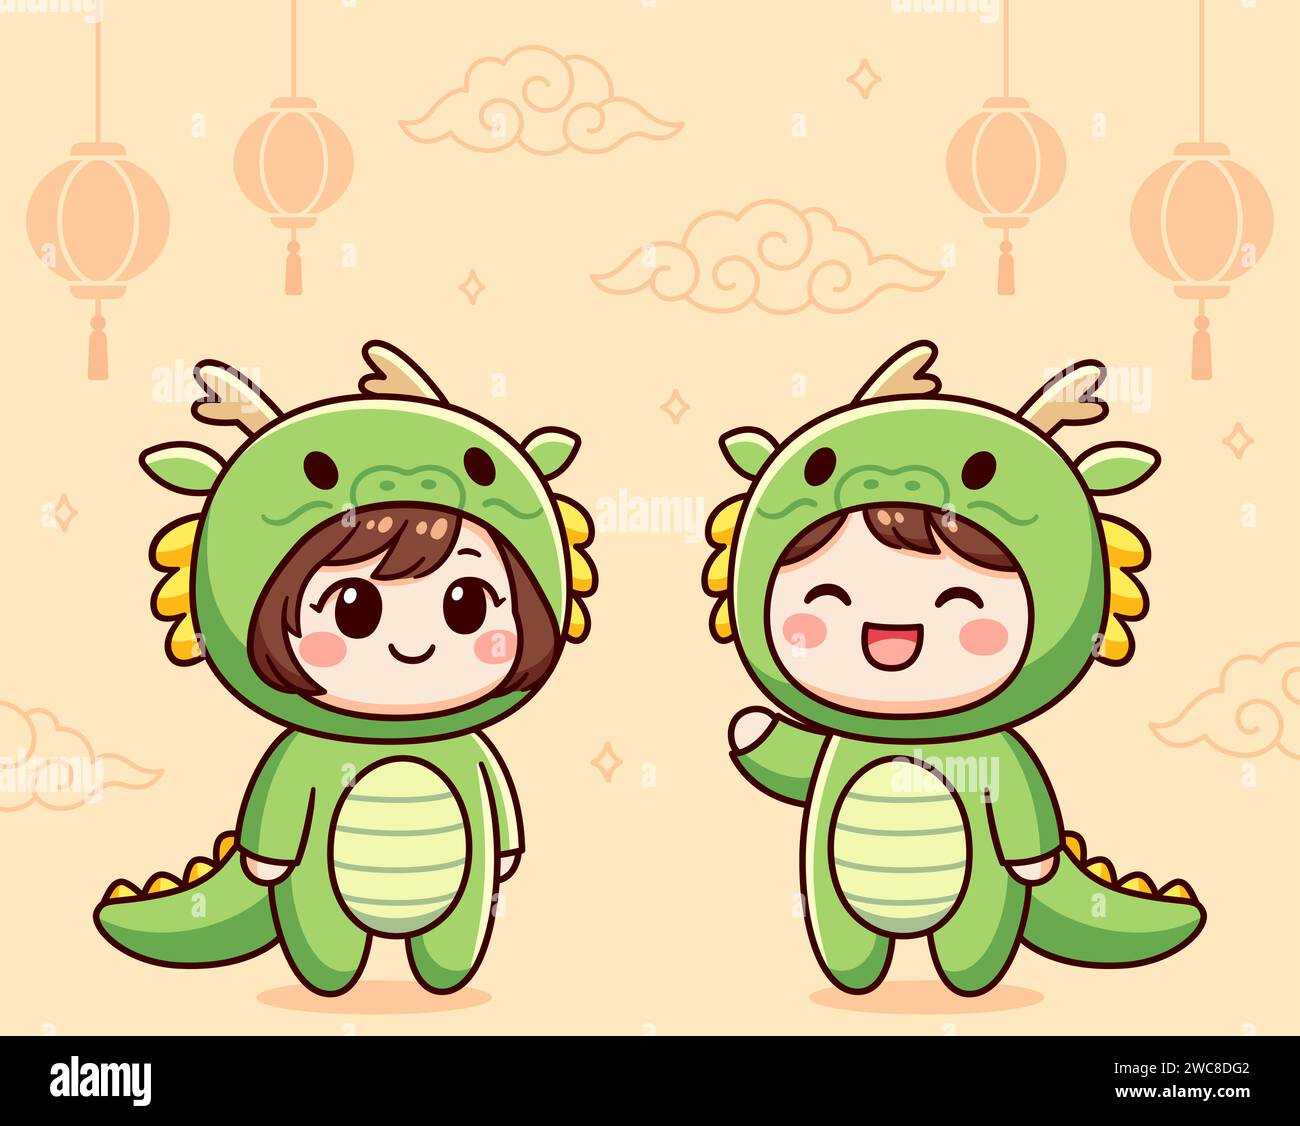 Kawaii children in green dragon costumes. Little boy and girl Chinese New Year greeting card. Cute cartoon vector clip art illustration. Stock Vector